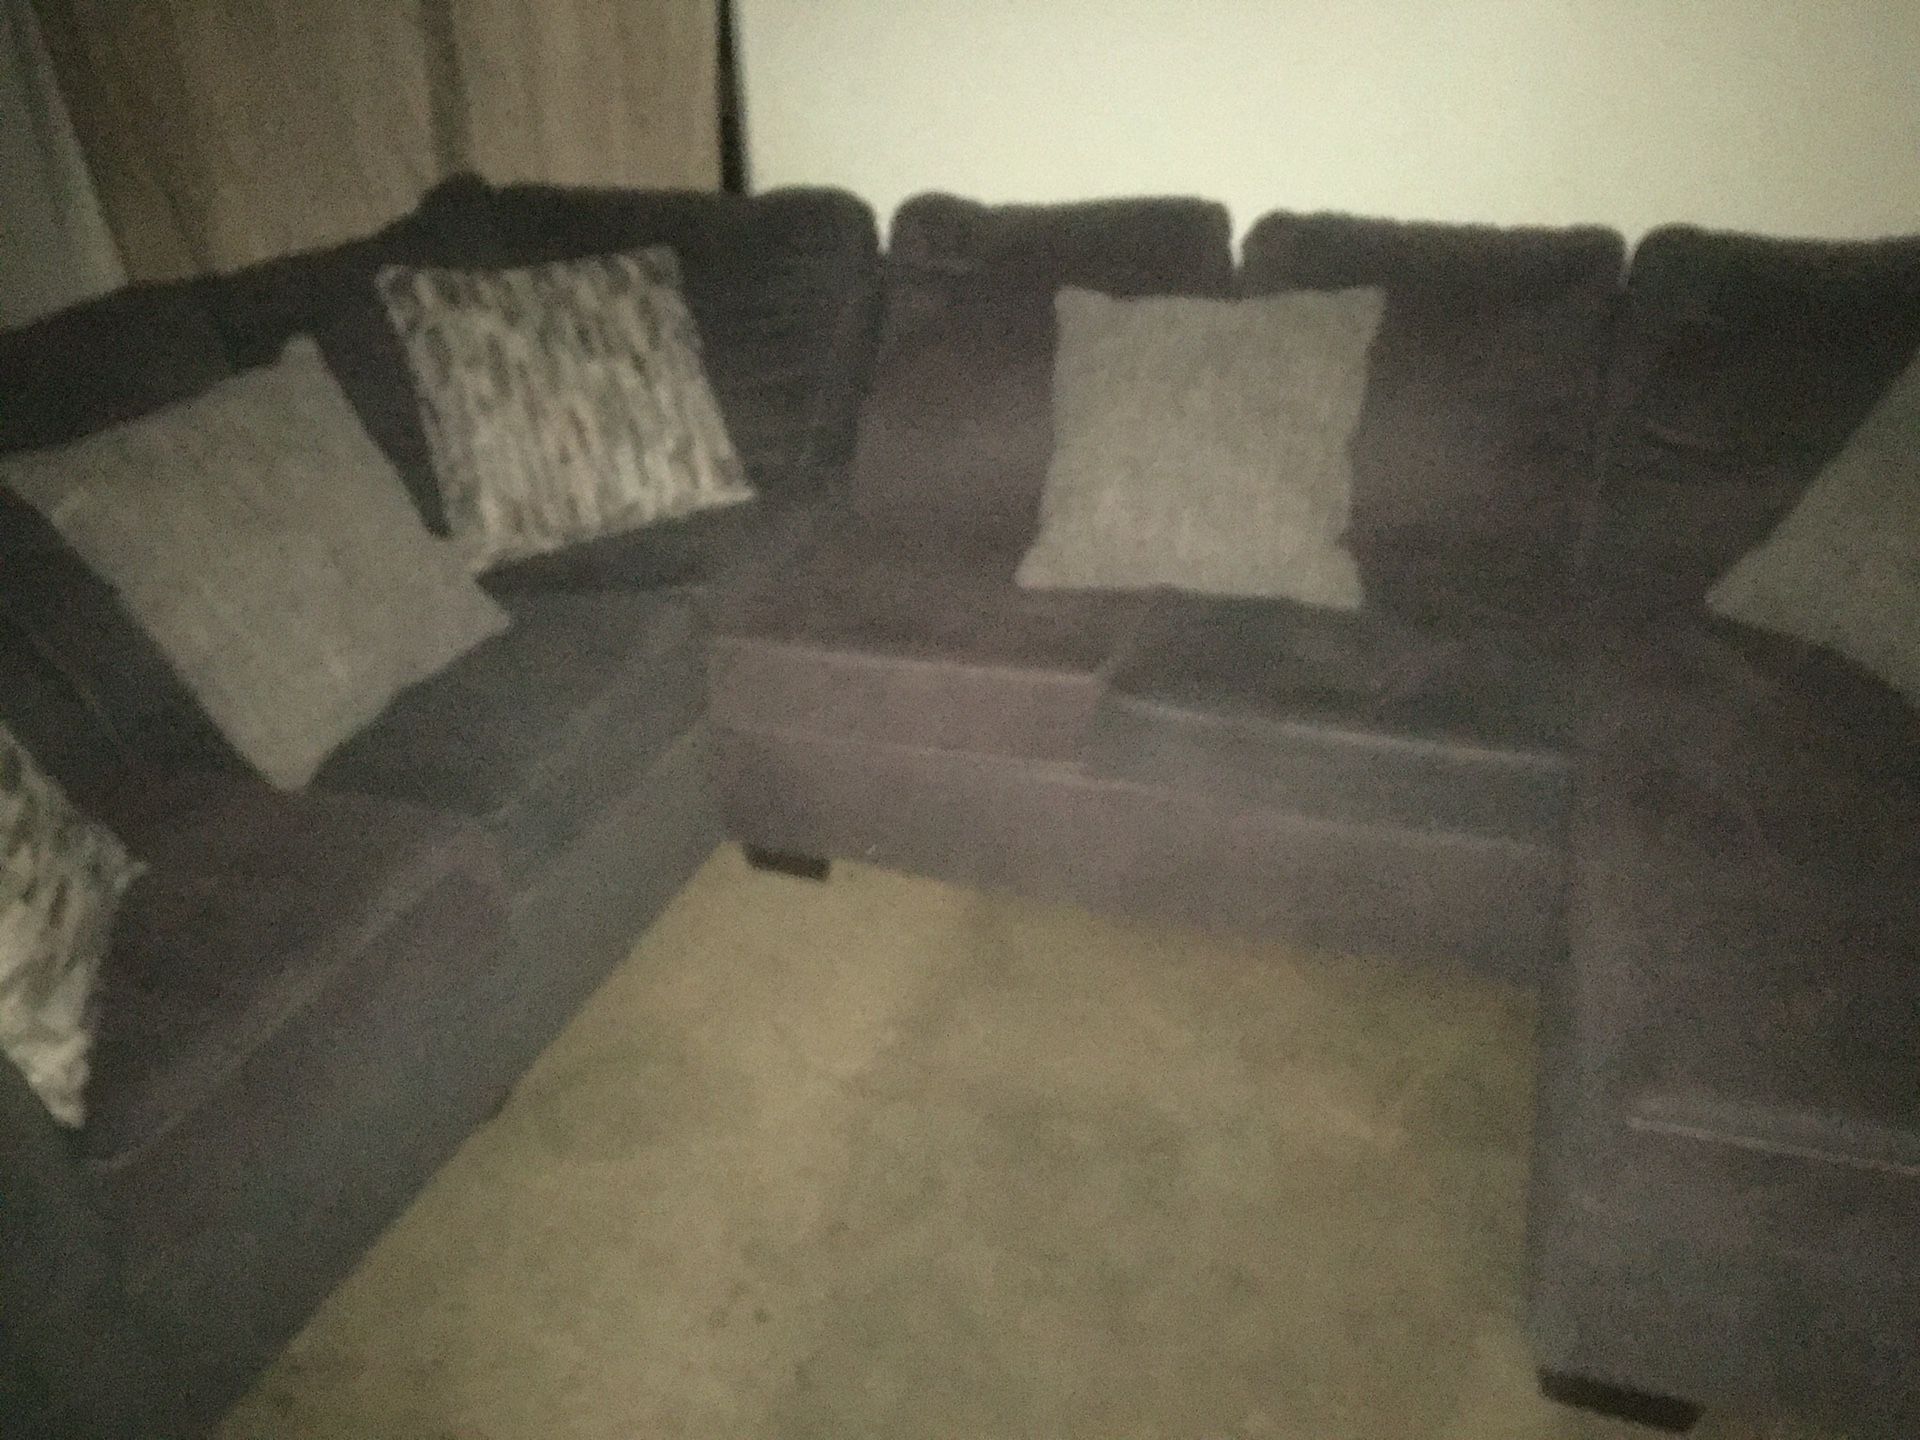 A Sectional couch